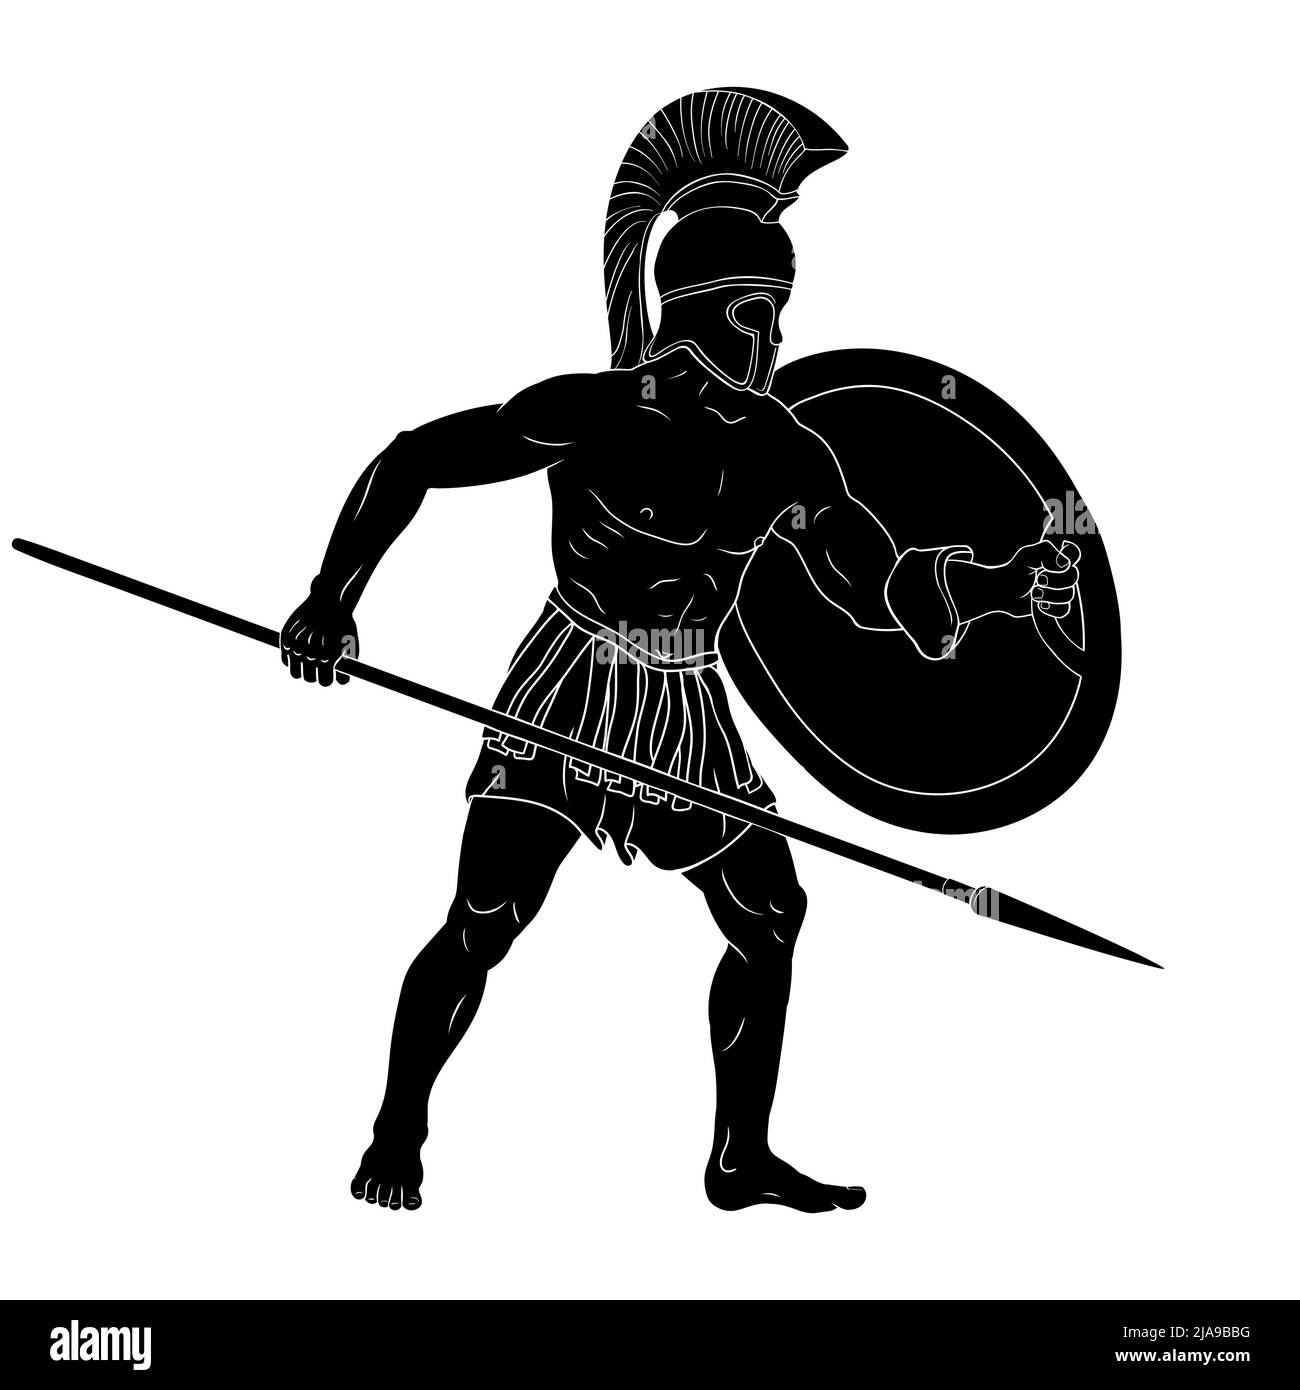 Roman Empire warrior in armor and a helmet with a weapon in hand stands ready for attack and defense isolated on white background. Stock Vector